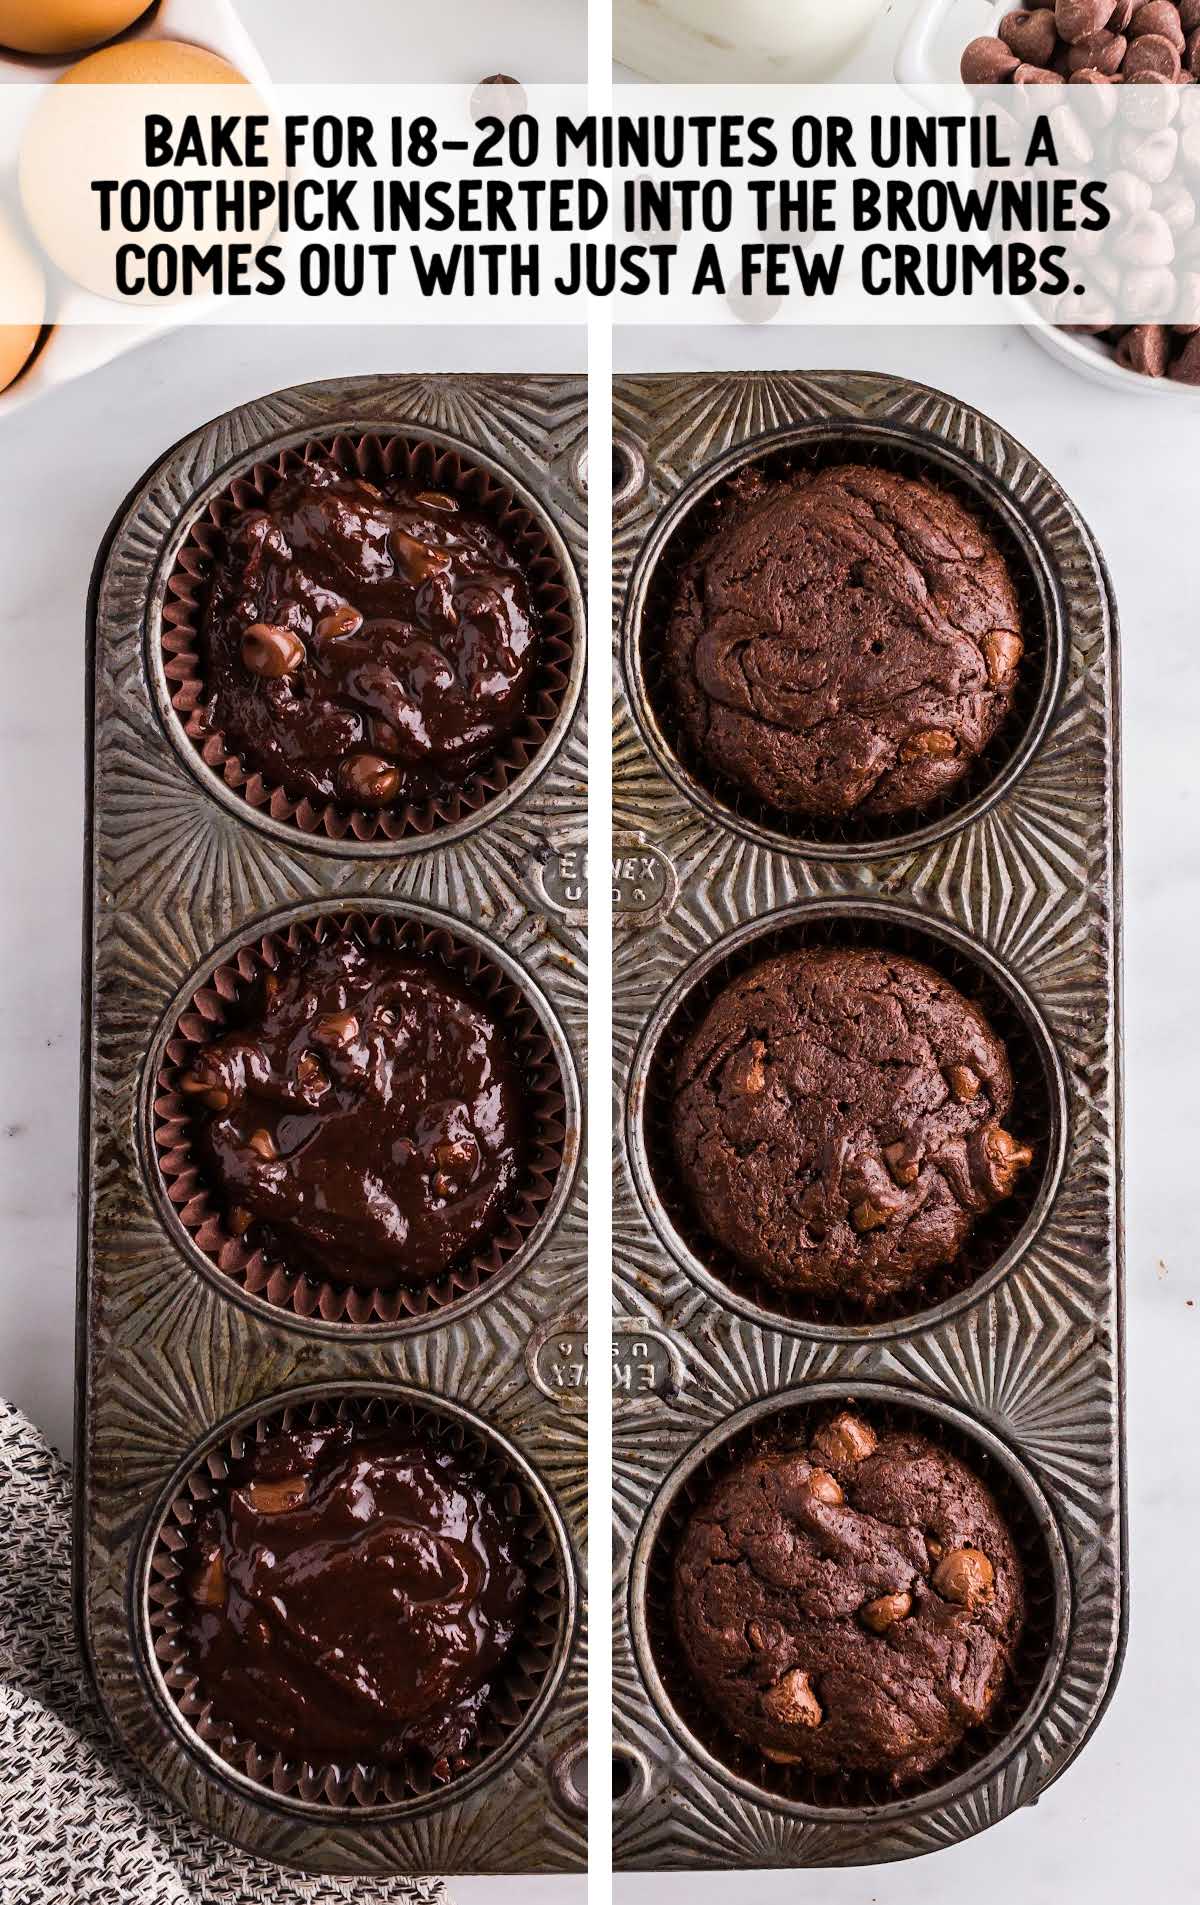 Brownie Cupcakes baked for 18-20 minutes